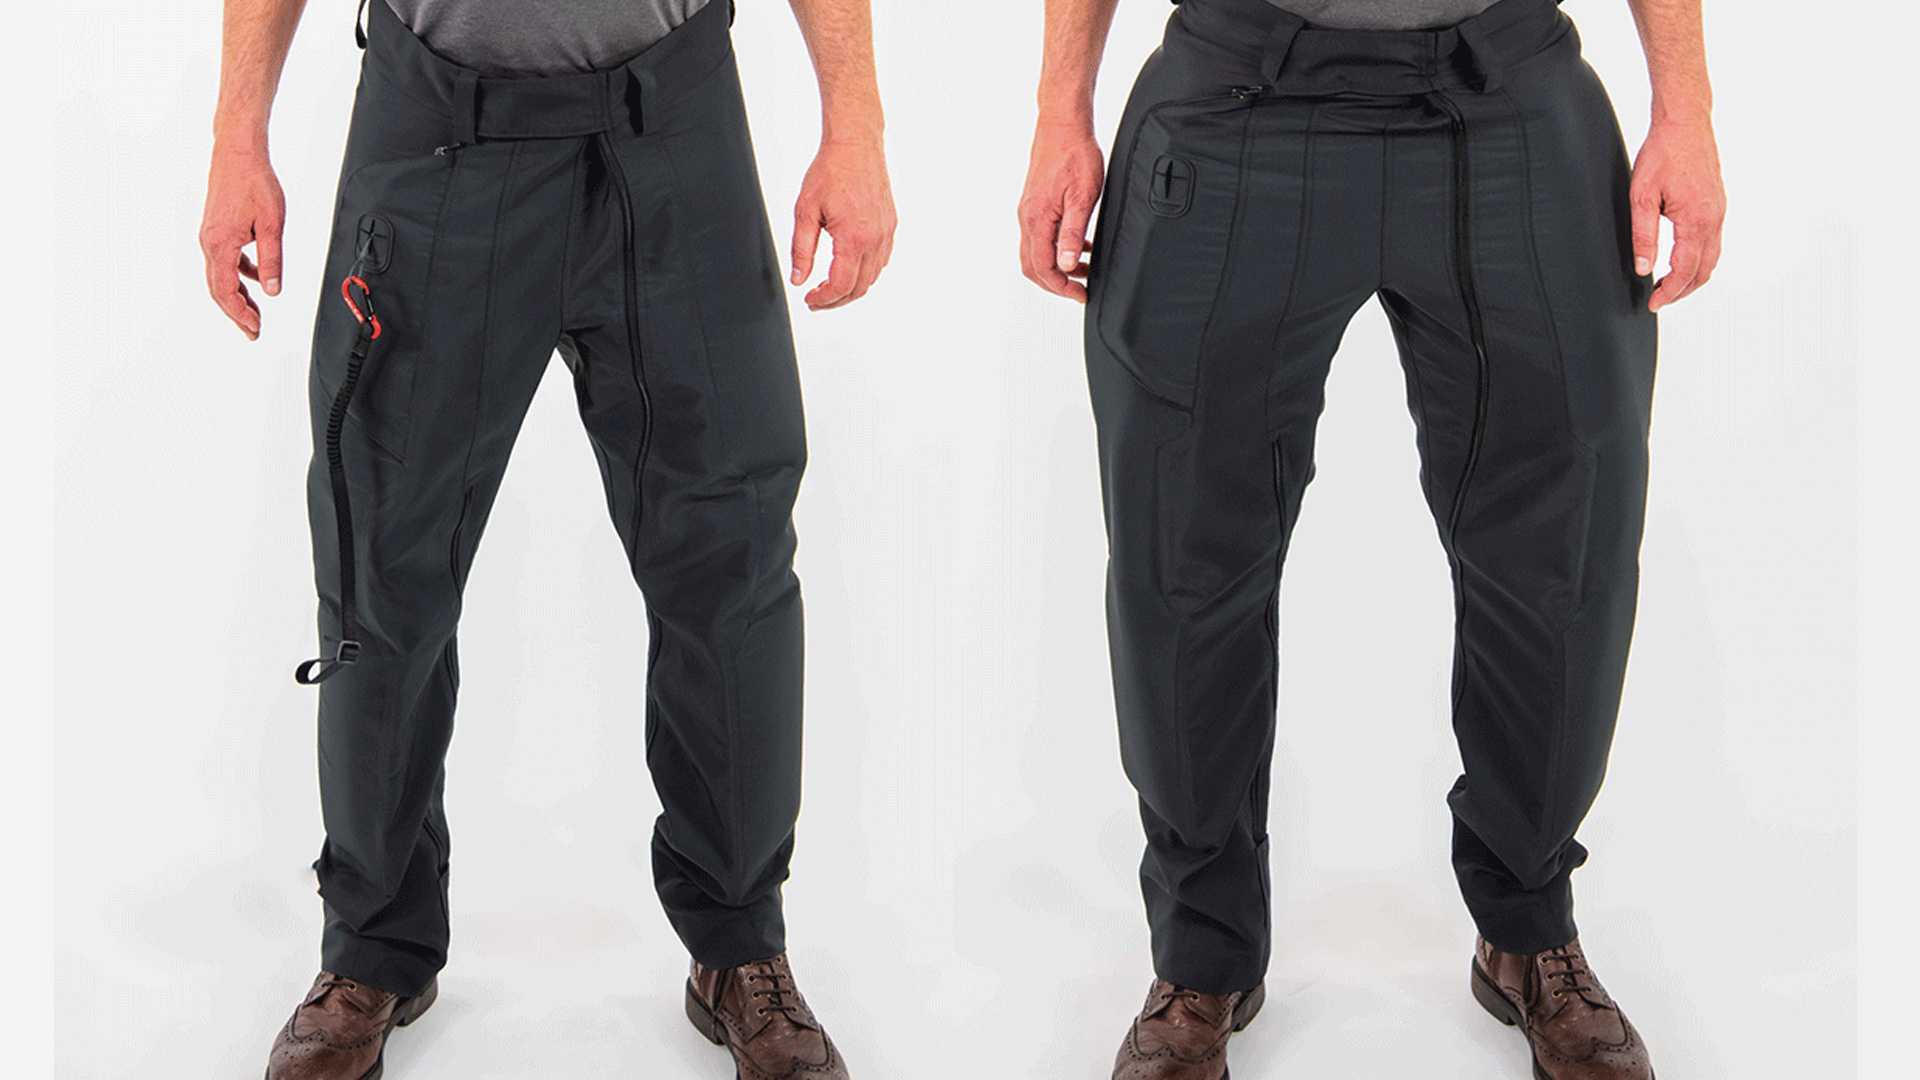 A front and rear view of the CX Free Rider airbag pants normal (left) and airbag deployed (right)